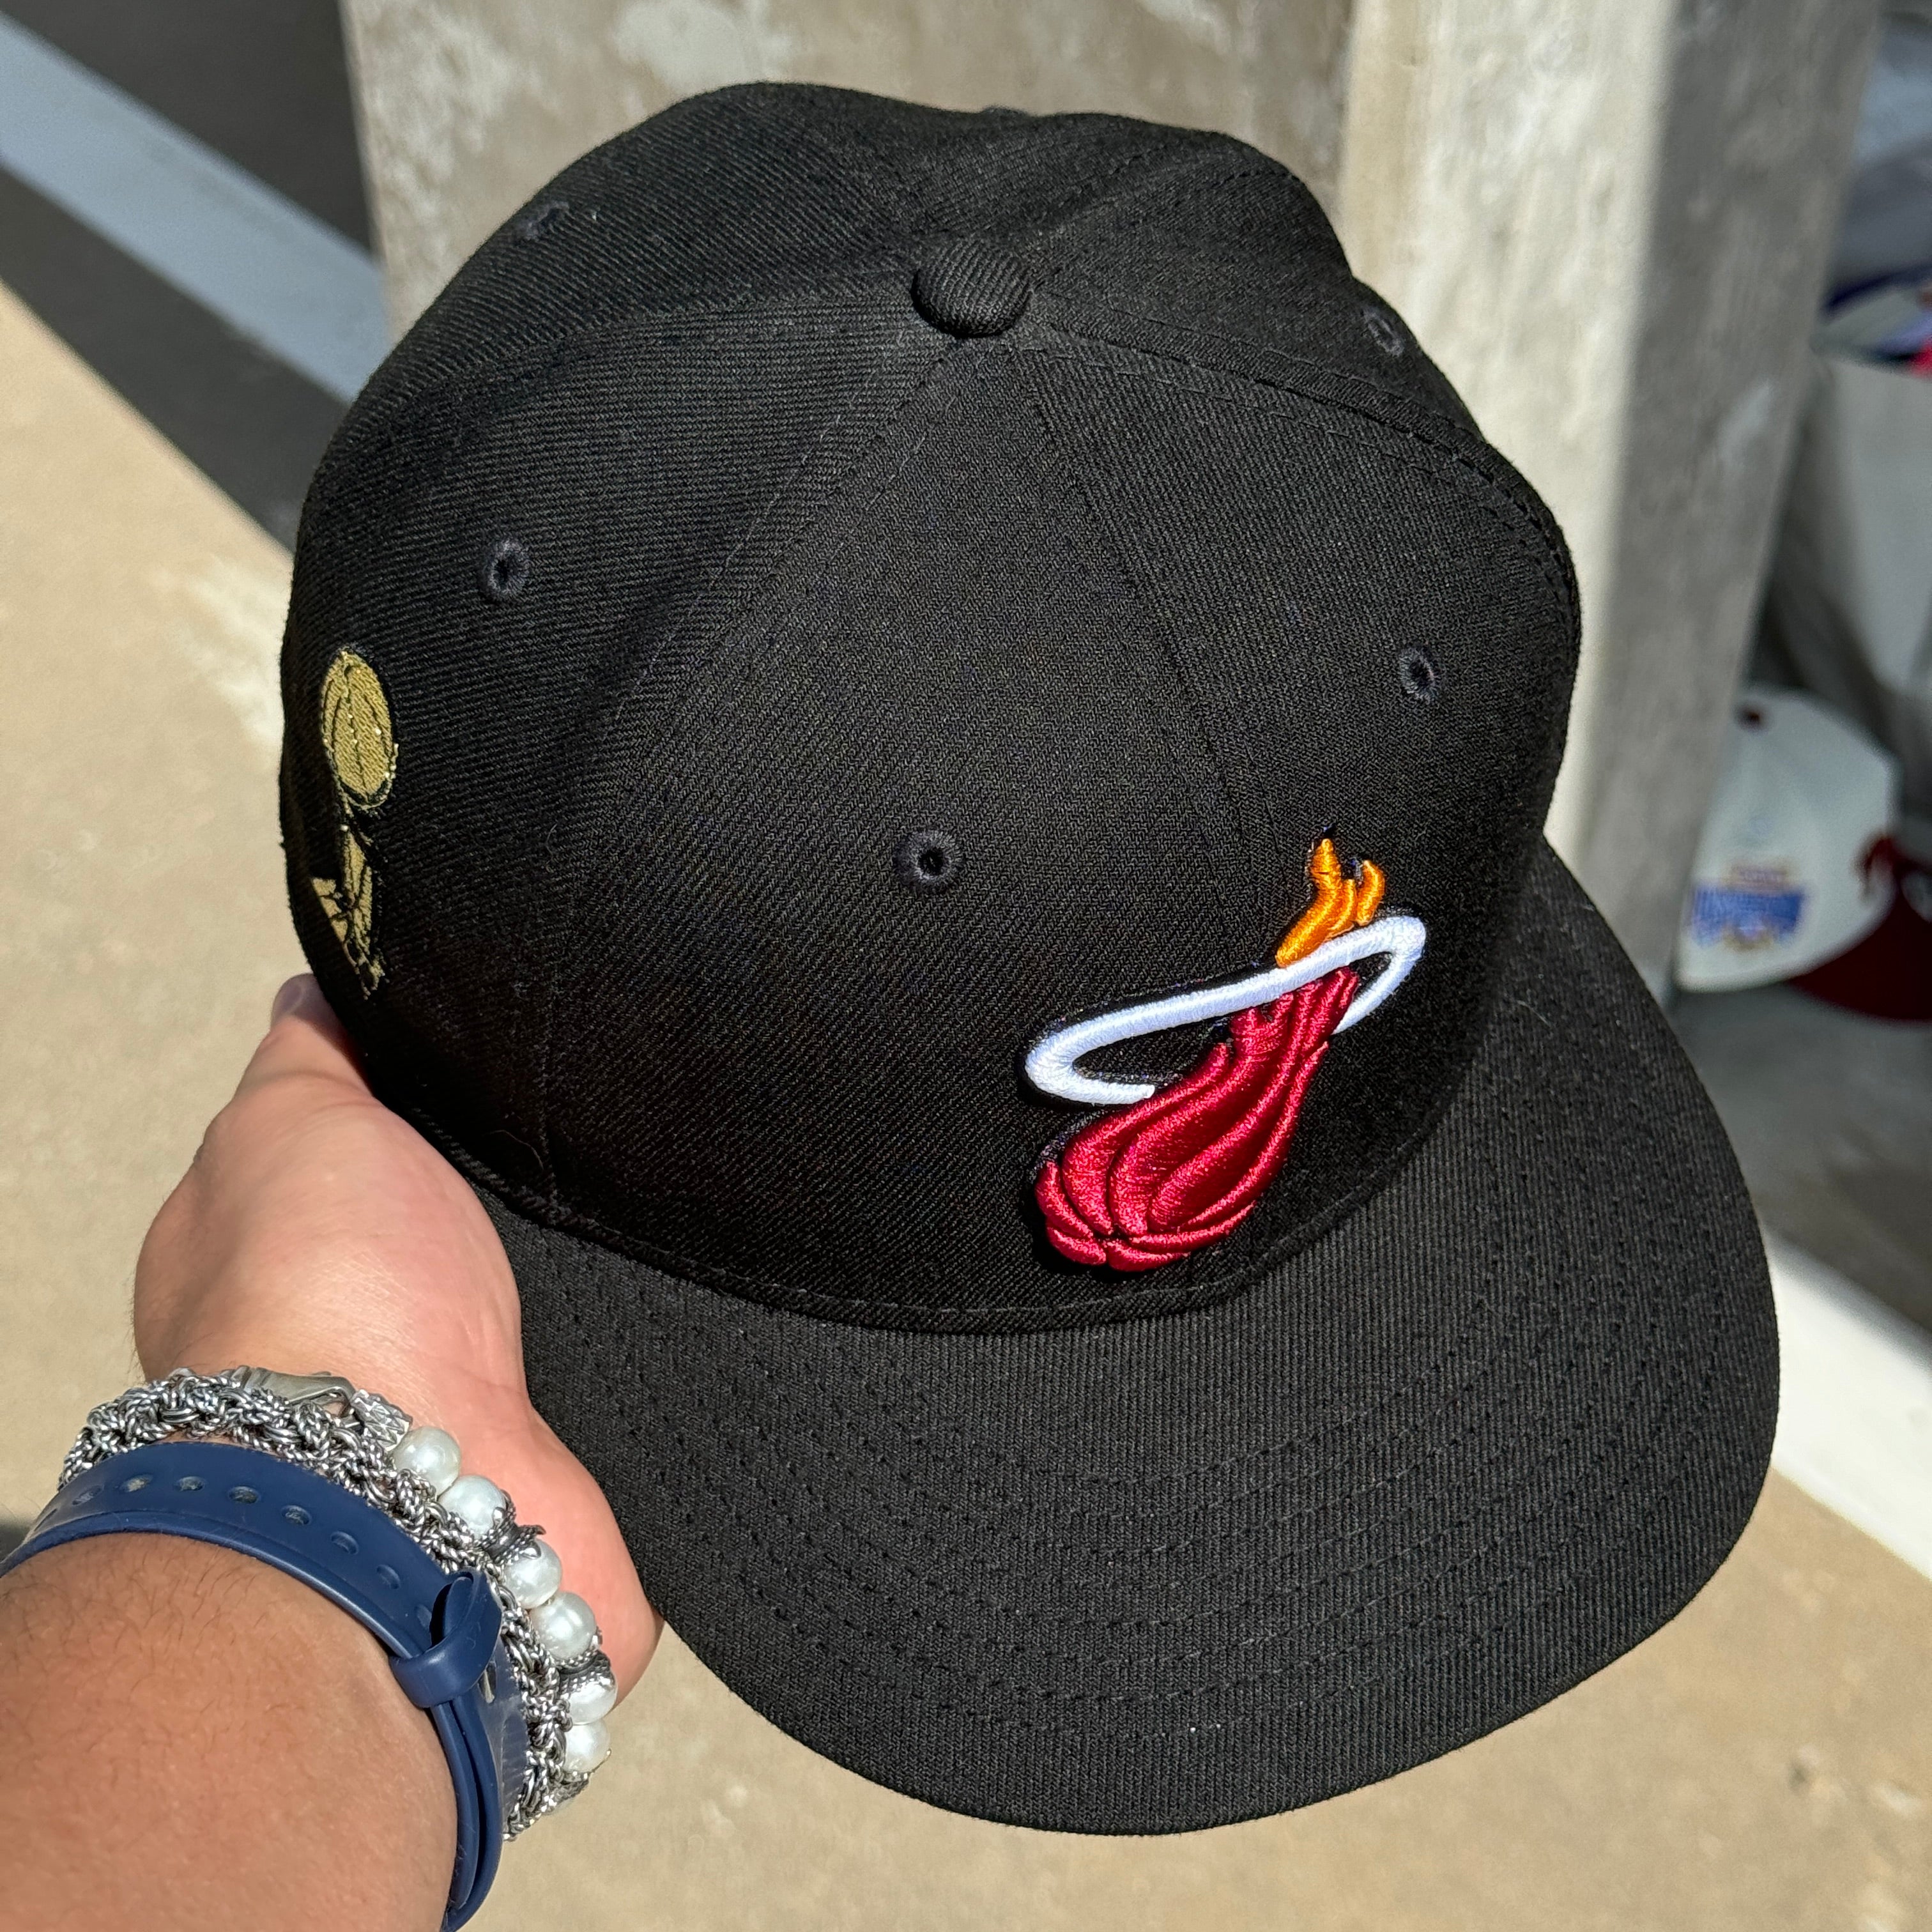 USED 1/8 Black Miami Heat Gold Trophy 59fifty New Era Fitted Hat Cap